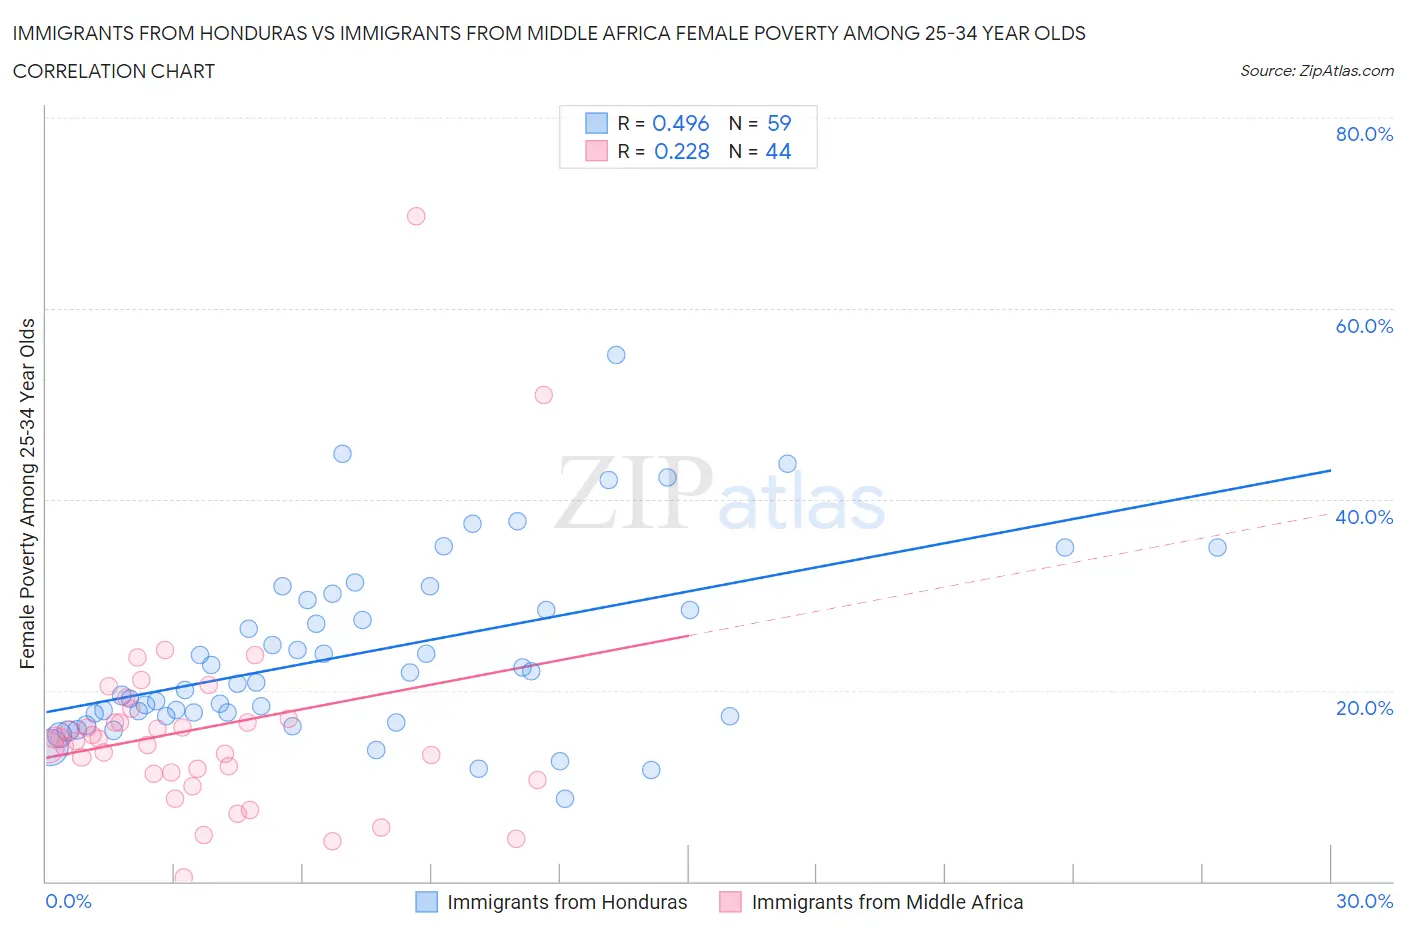 Immigrants from Honduras vs Immigrants from Middle Africa Female Poverty Among 25-34 Year Olds